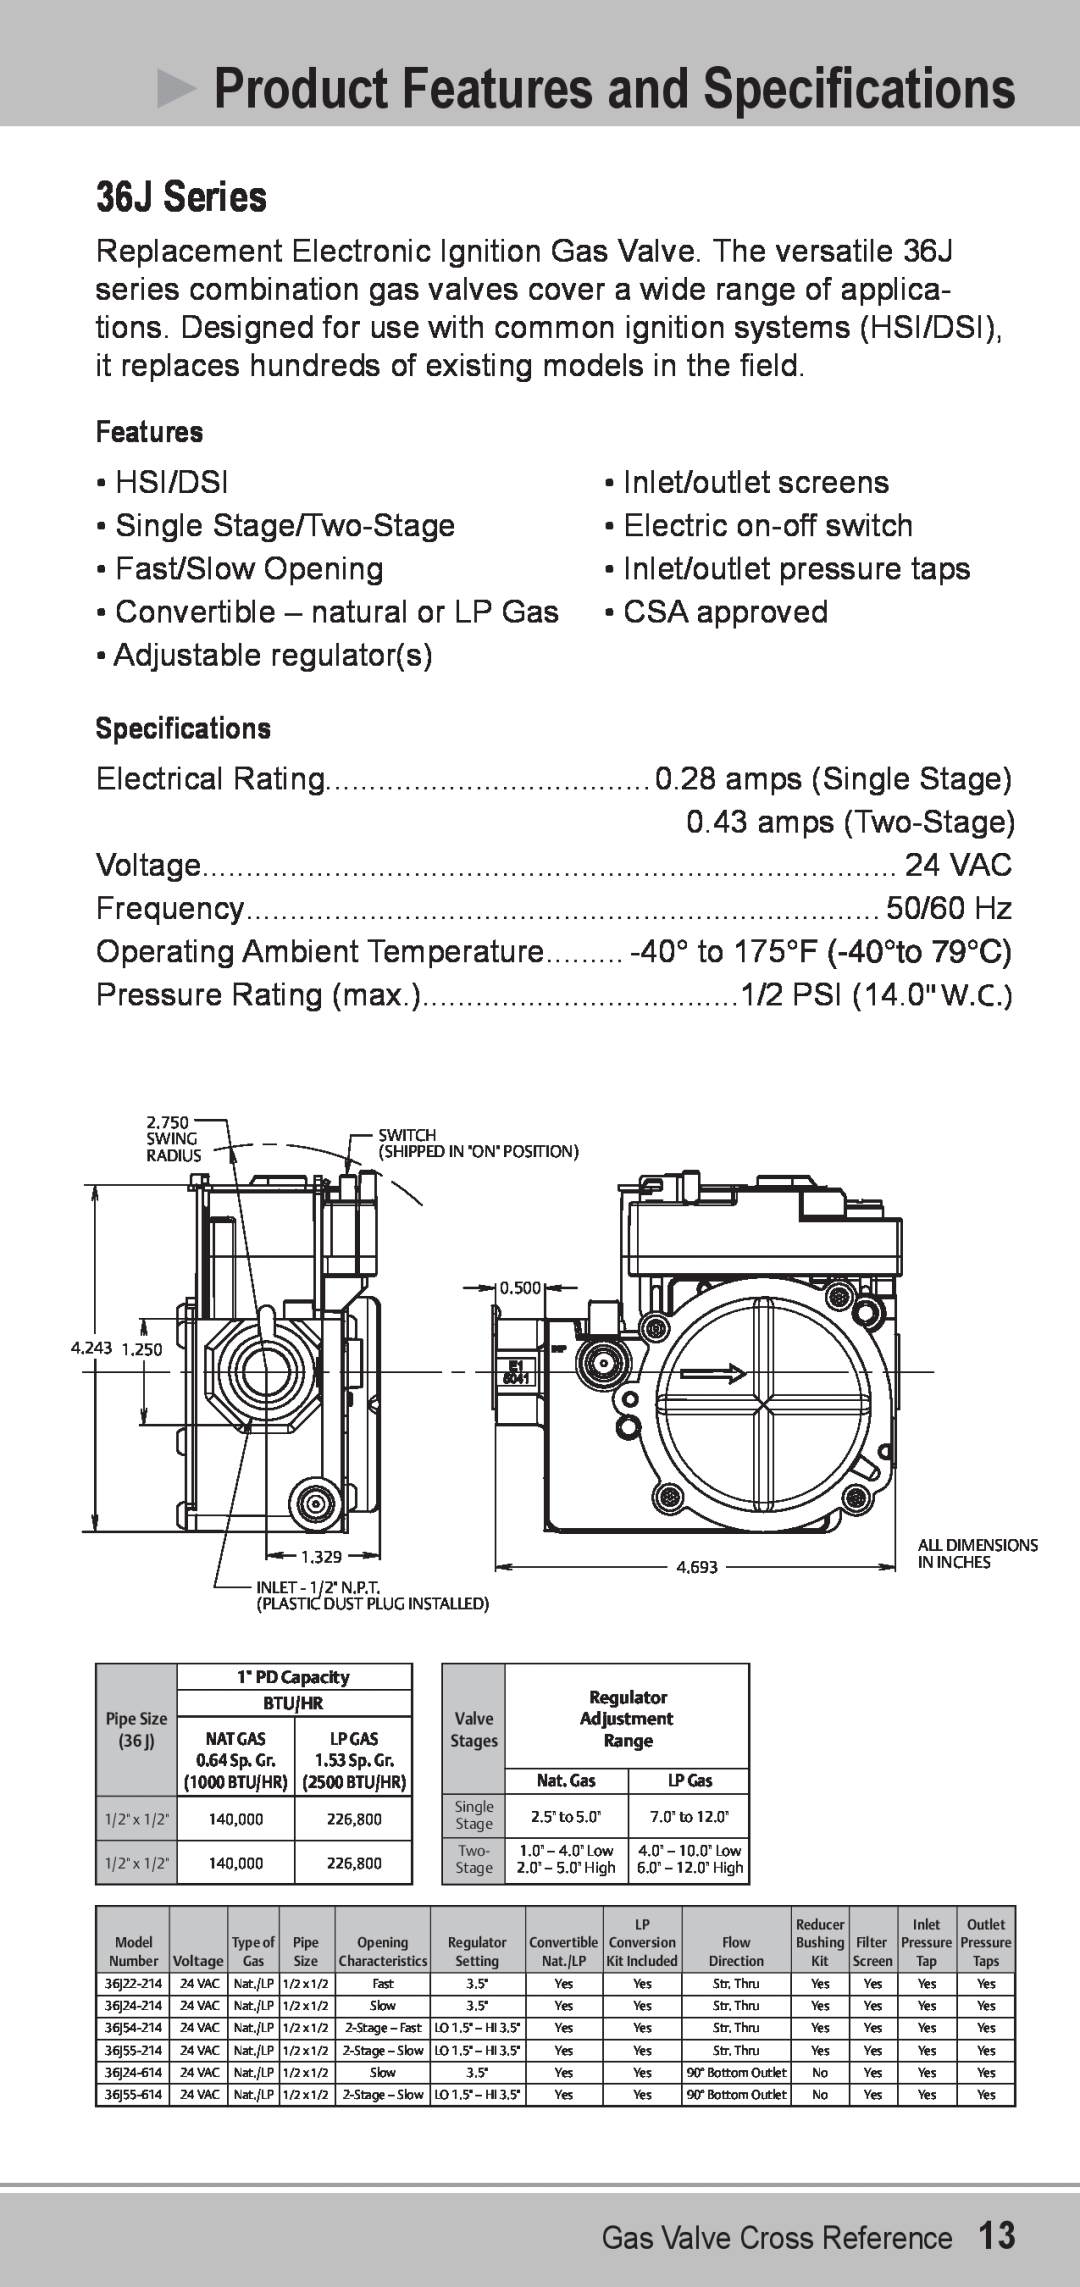 Emerson 36H manual 36J Series, Product Features and Specifications 